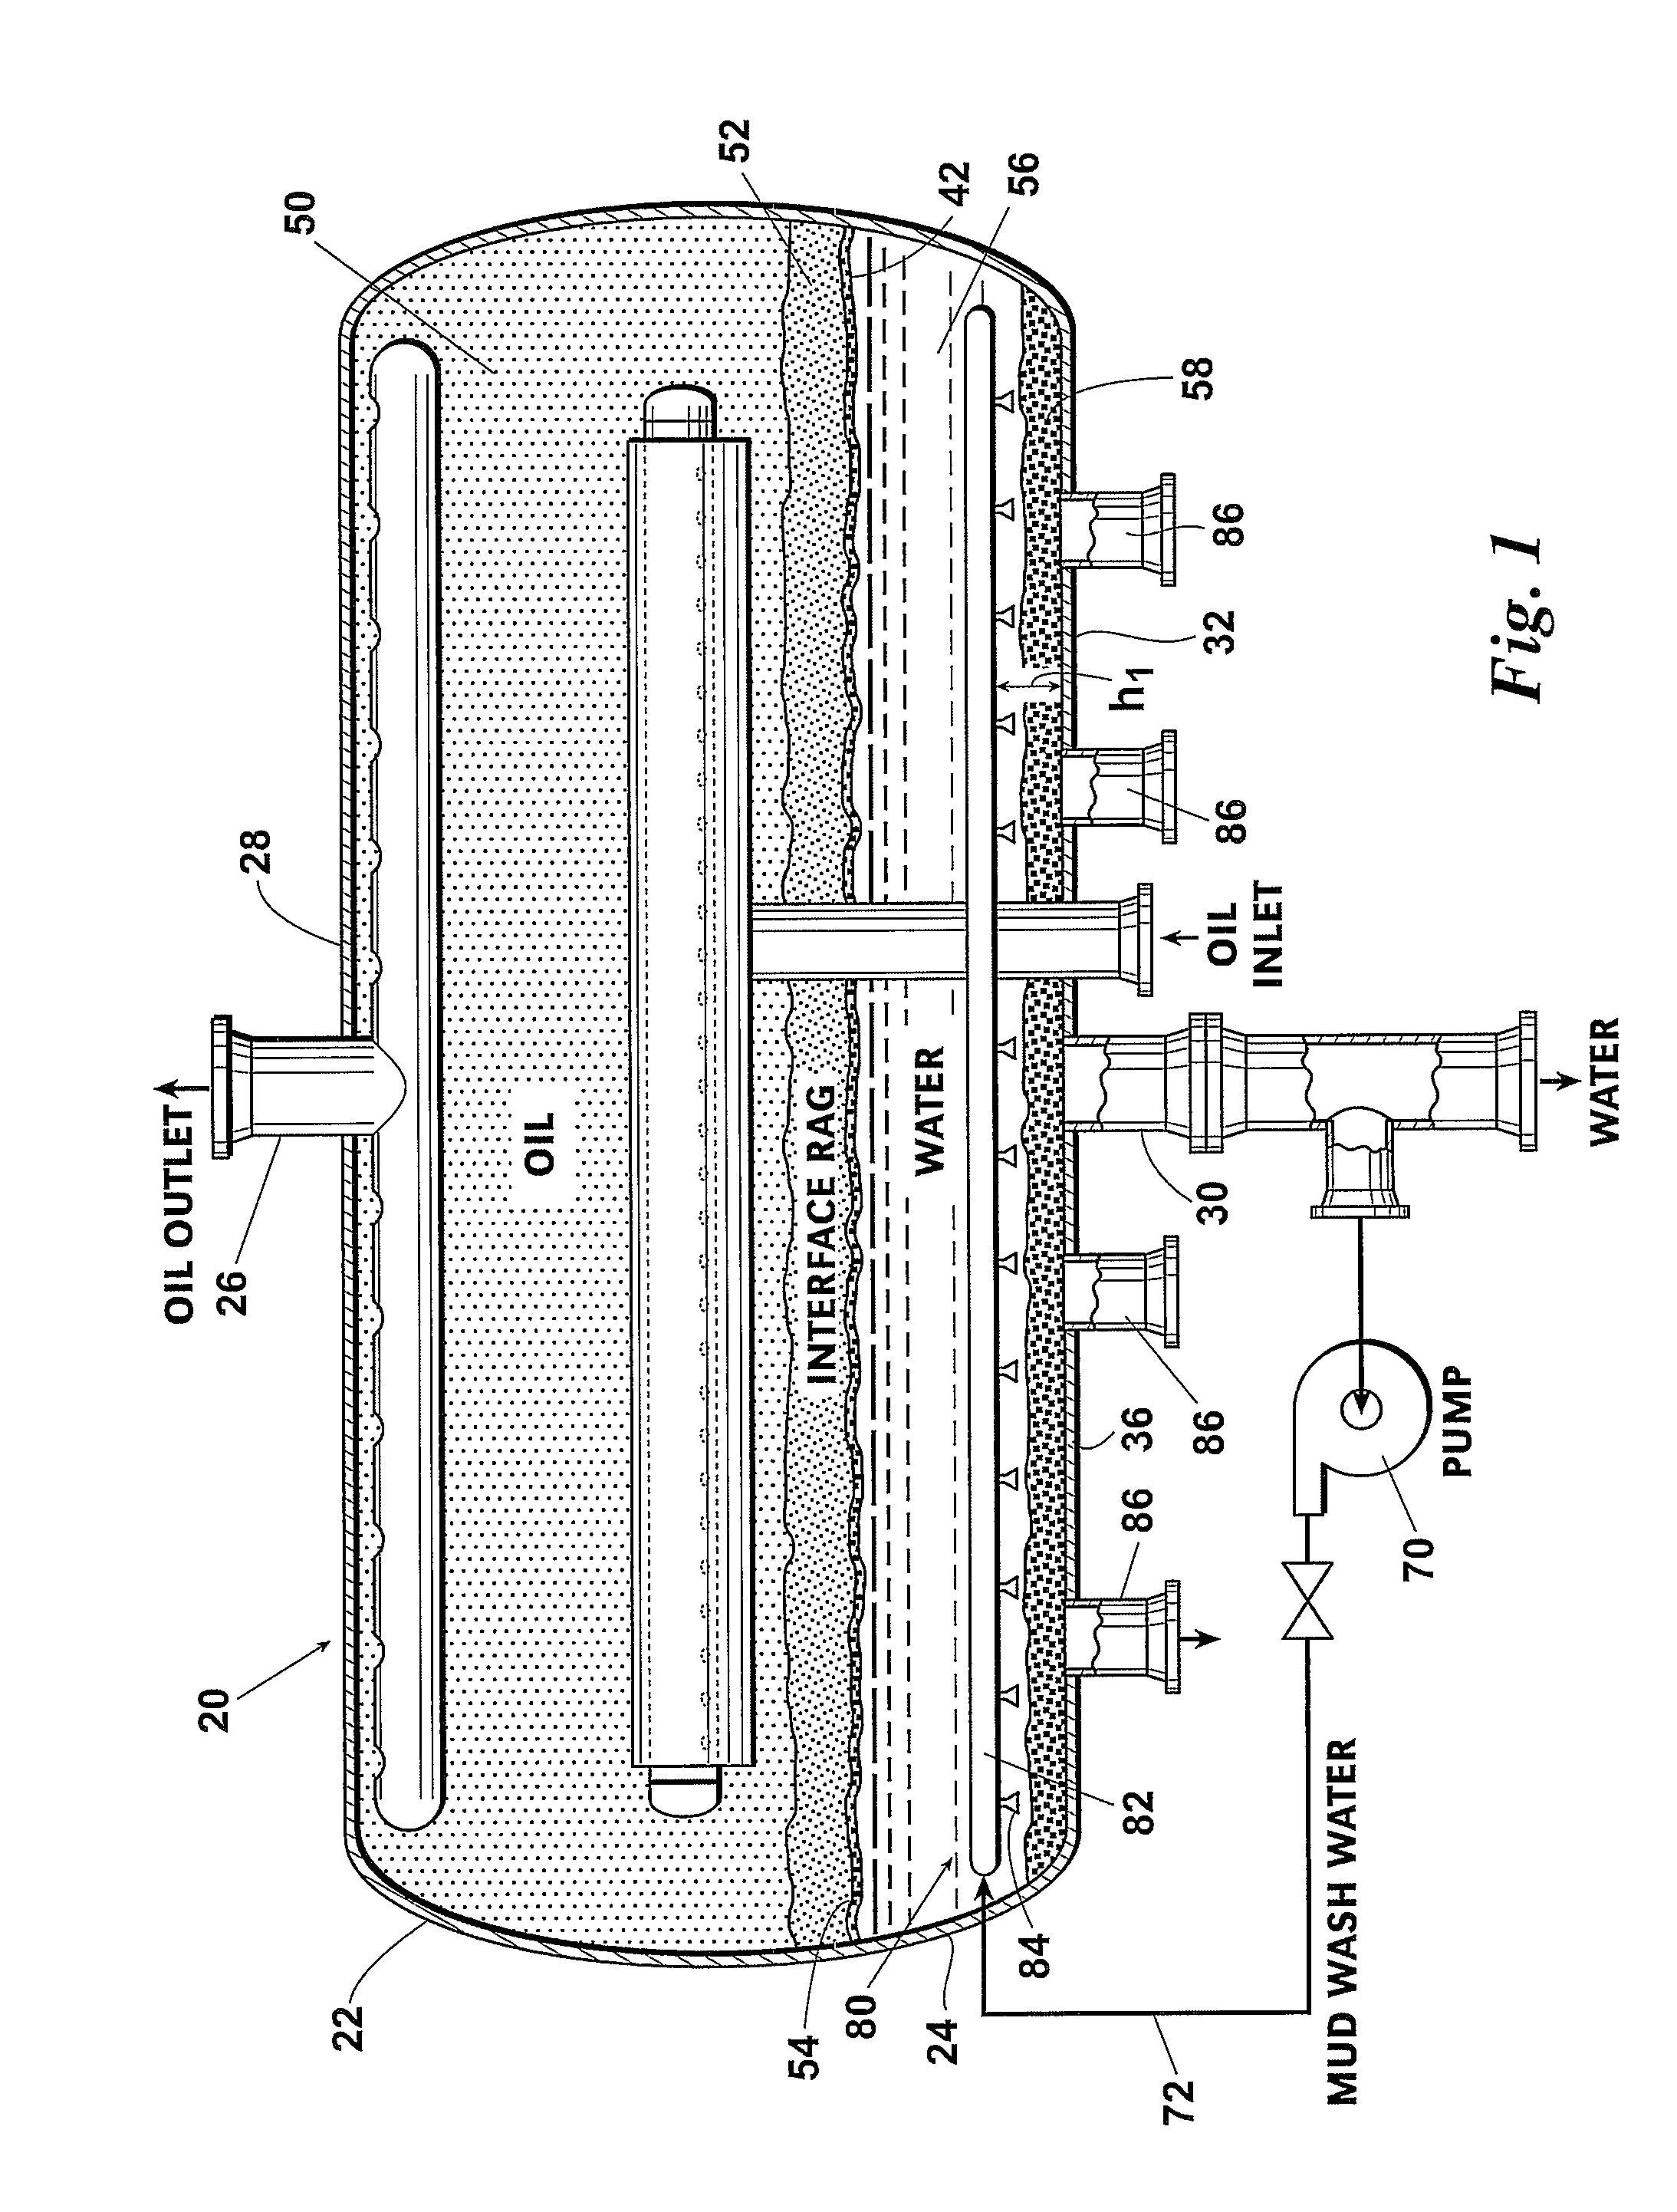 Interface and Mud Control System and Method for Refinery Desalters